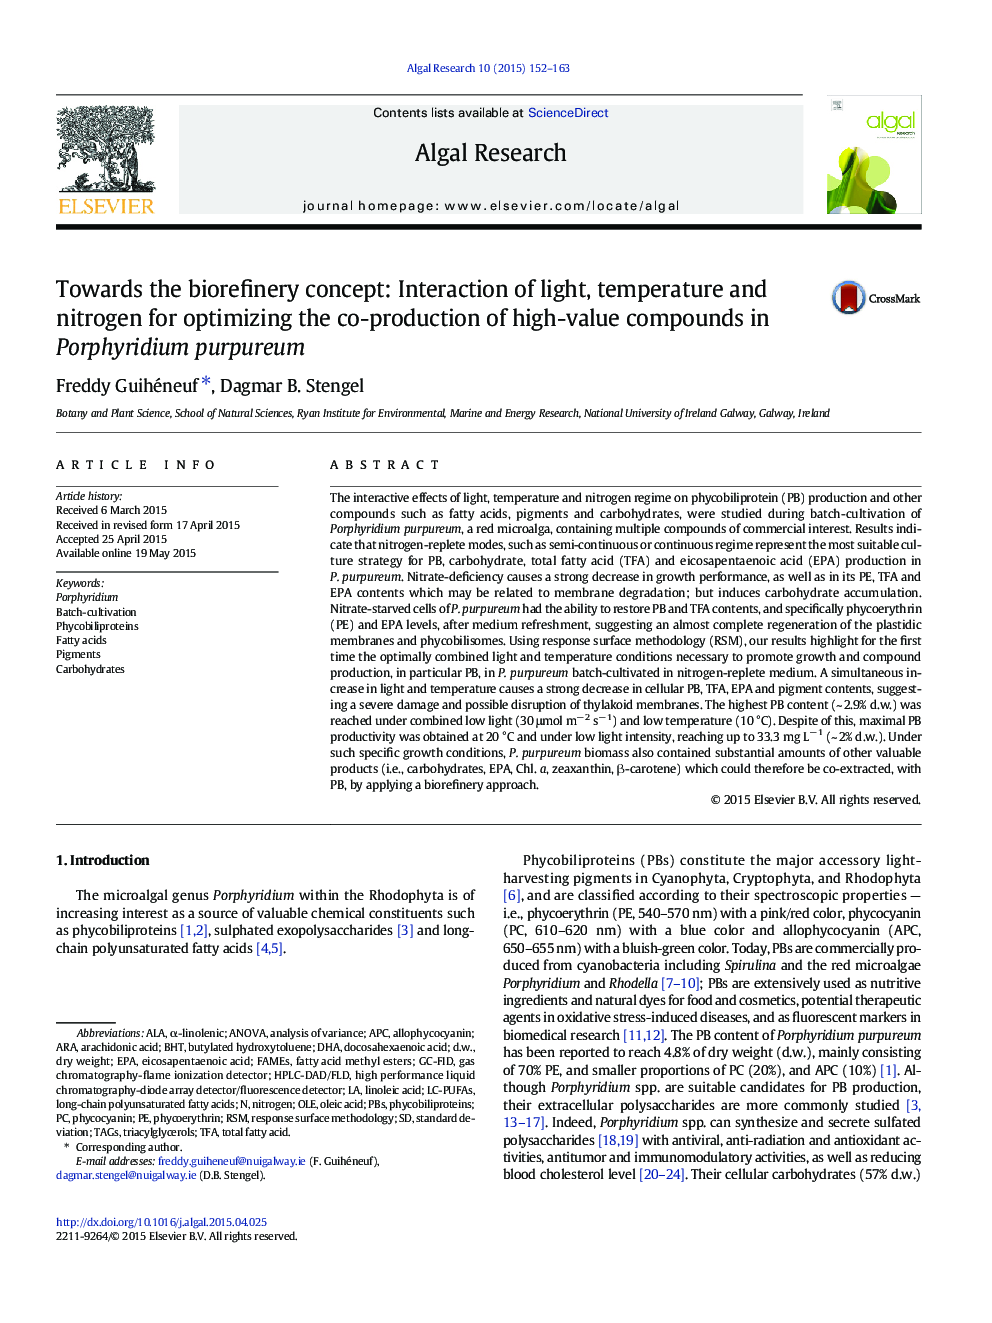 Towards the biorefinery concept: Interaction of light, temperature and nitrogen for optimizing the co-production of high-value compounds in Porphyridium purpureum